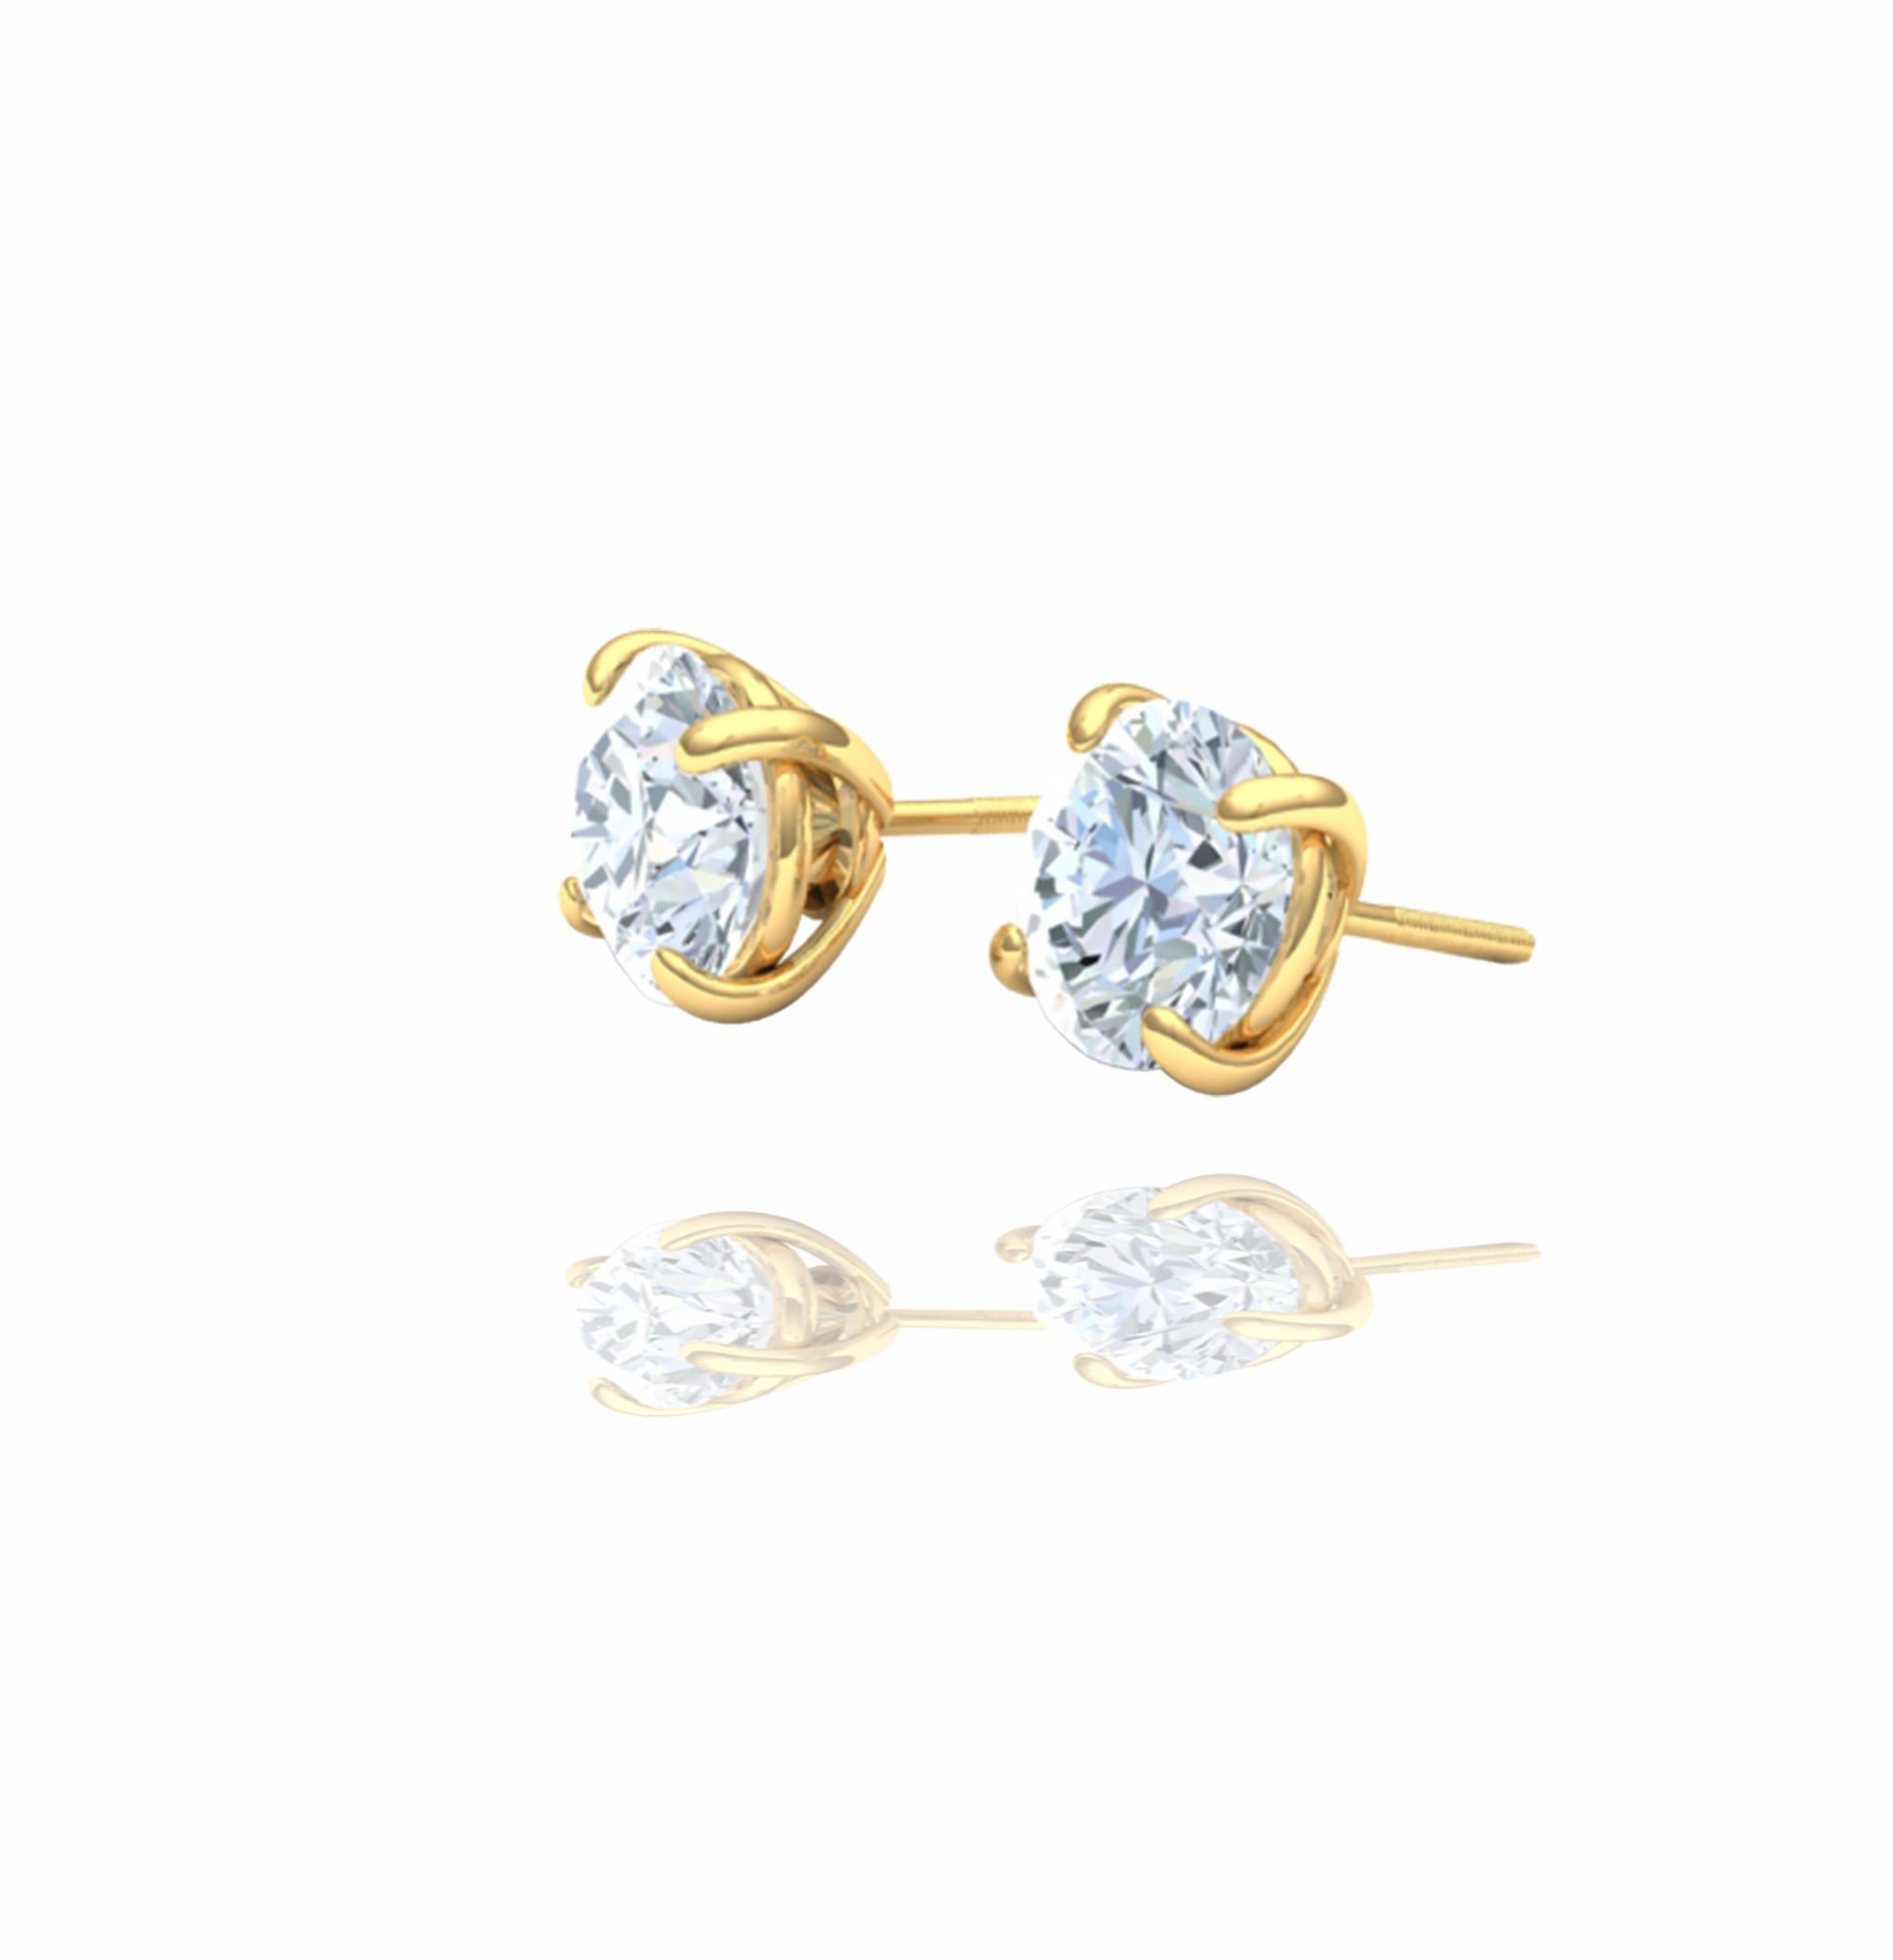 This classic 3ctw diamond stud earrings have everything for the person looking for an everyday pair of earrings and jewelry.   These earrings have a 1.5 carat in each head and the diamonds have a color and clarity of F-G SI.  The total diamond carat